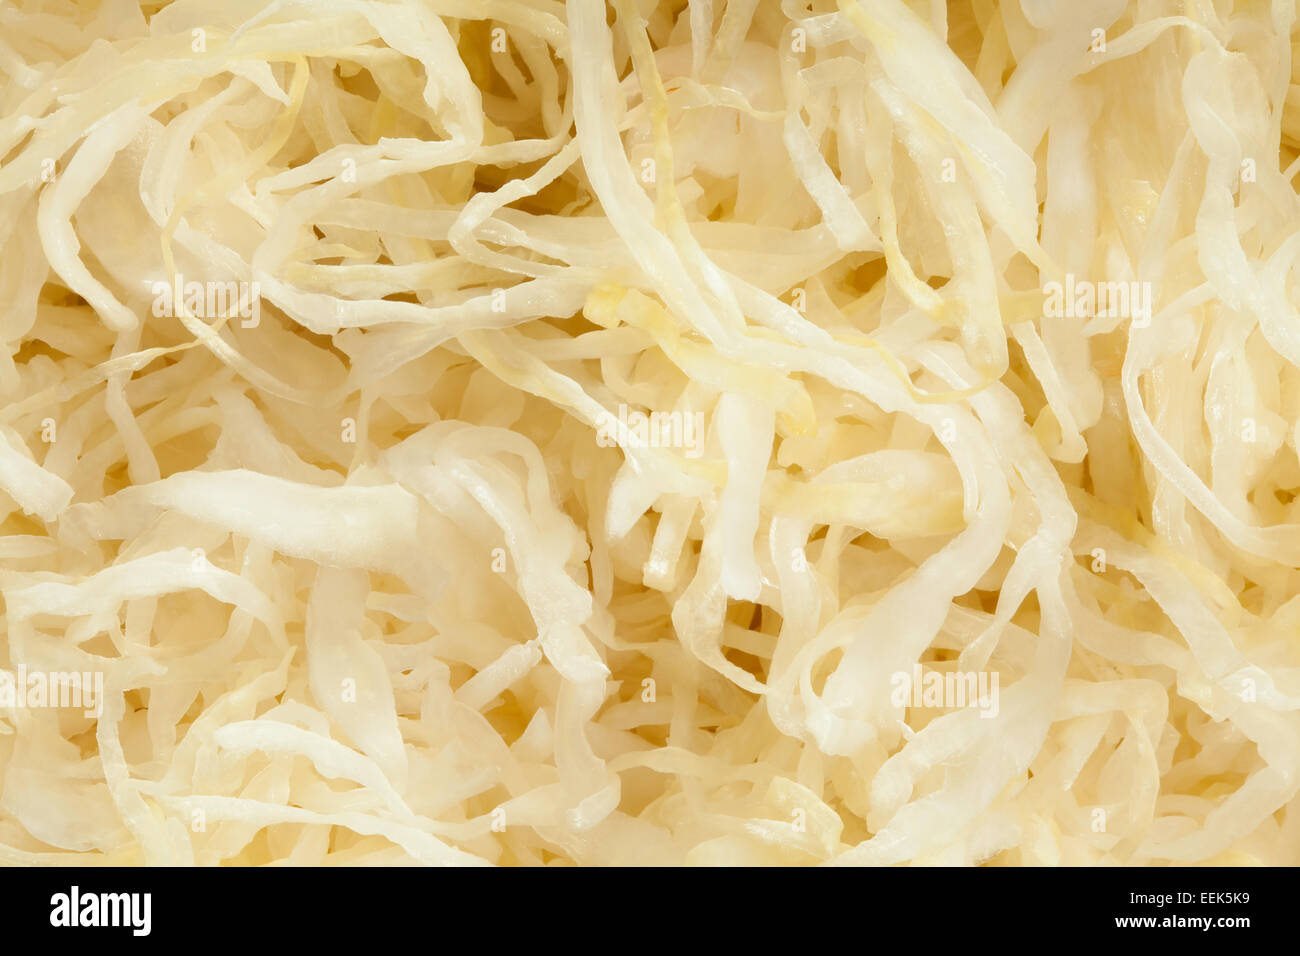 shredded cabbage texture Stock Photo